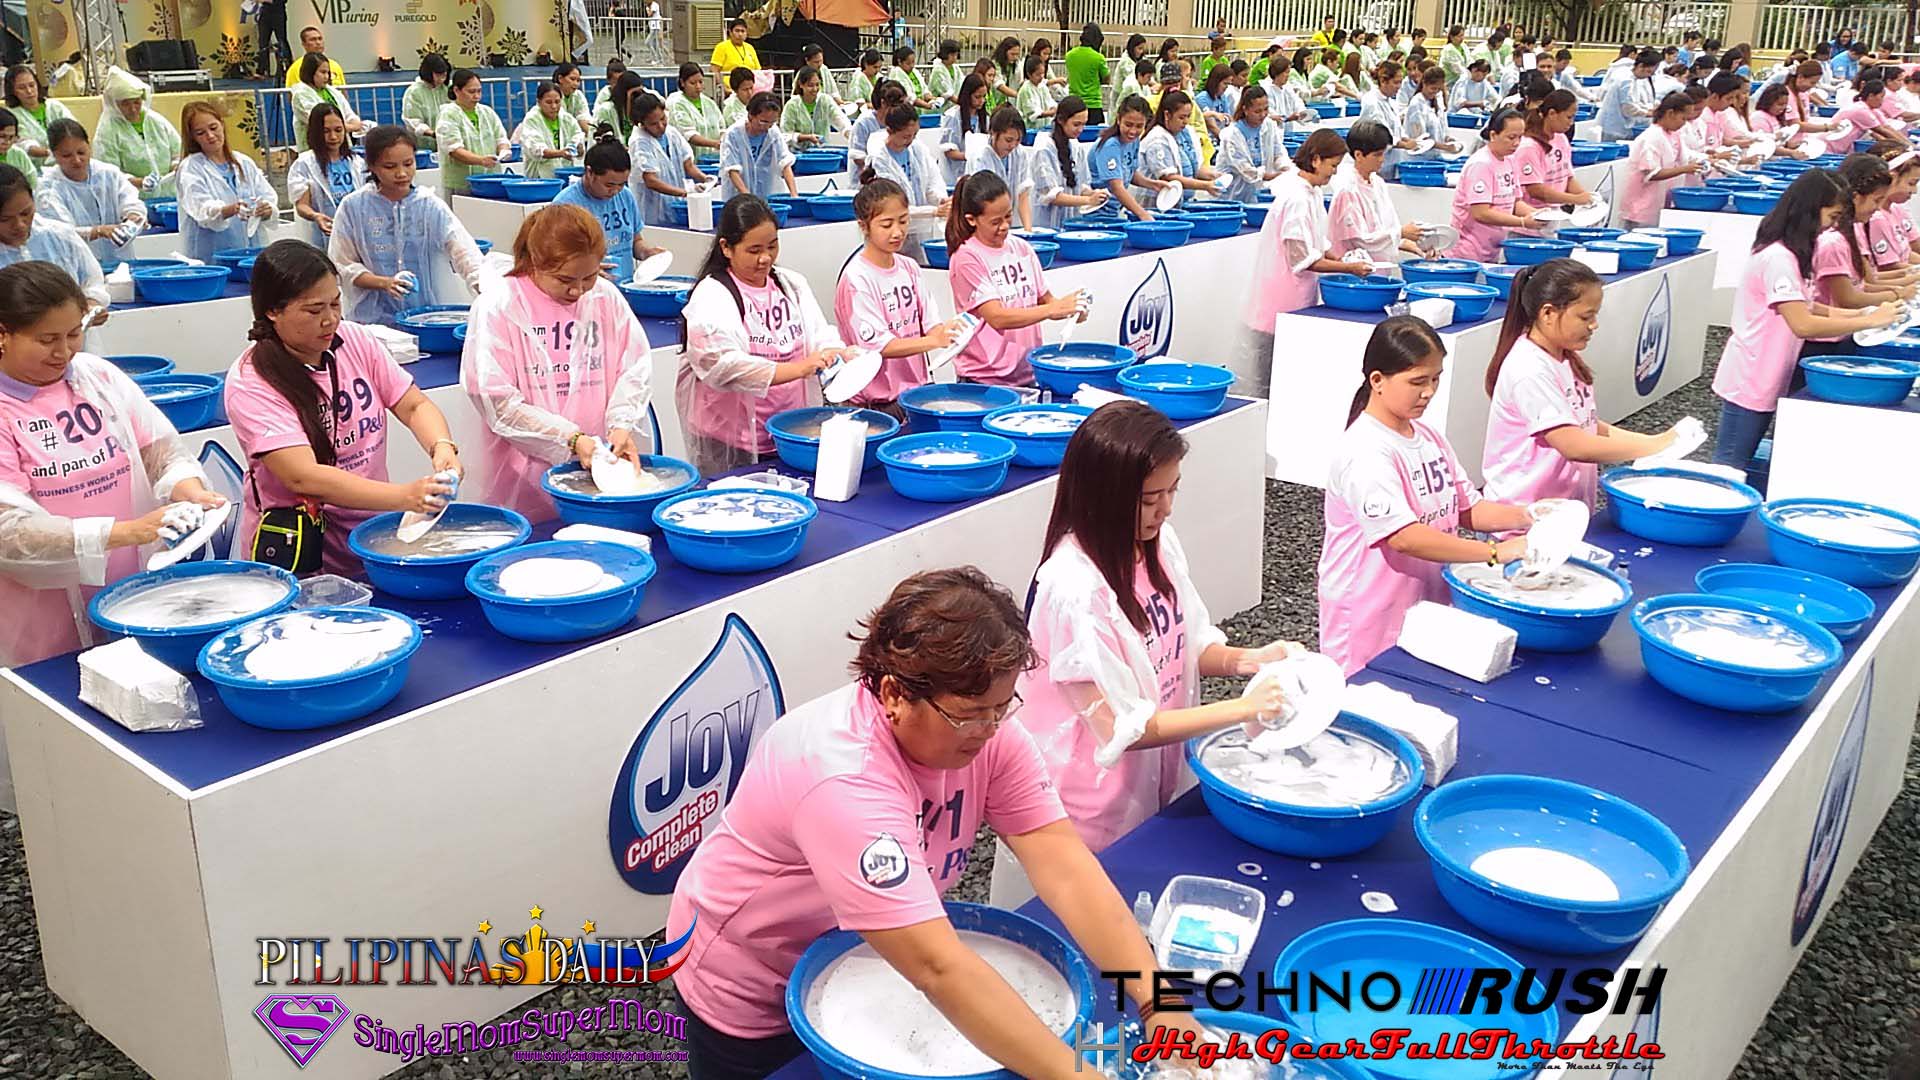 Guinness World Record Most People washing dishes simultaneously